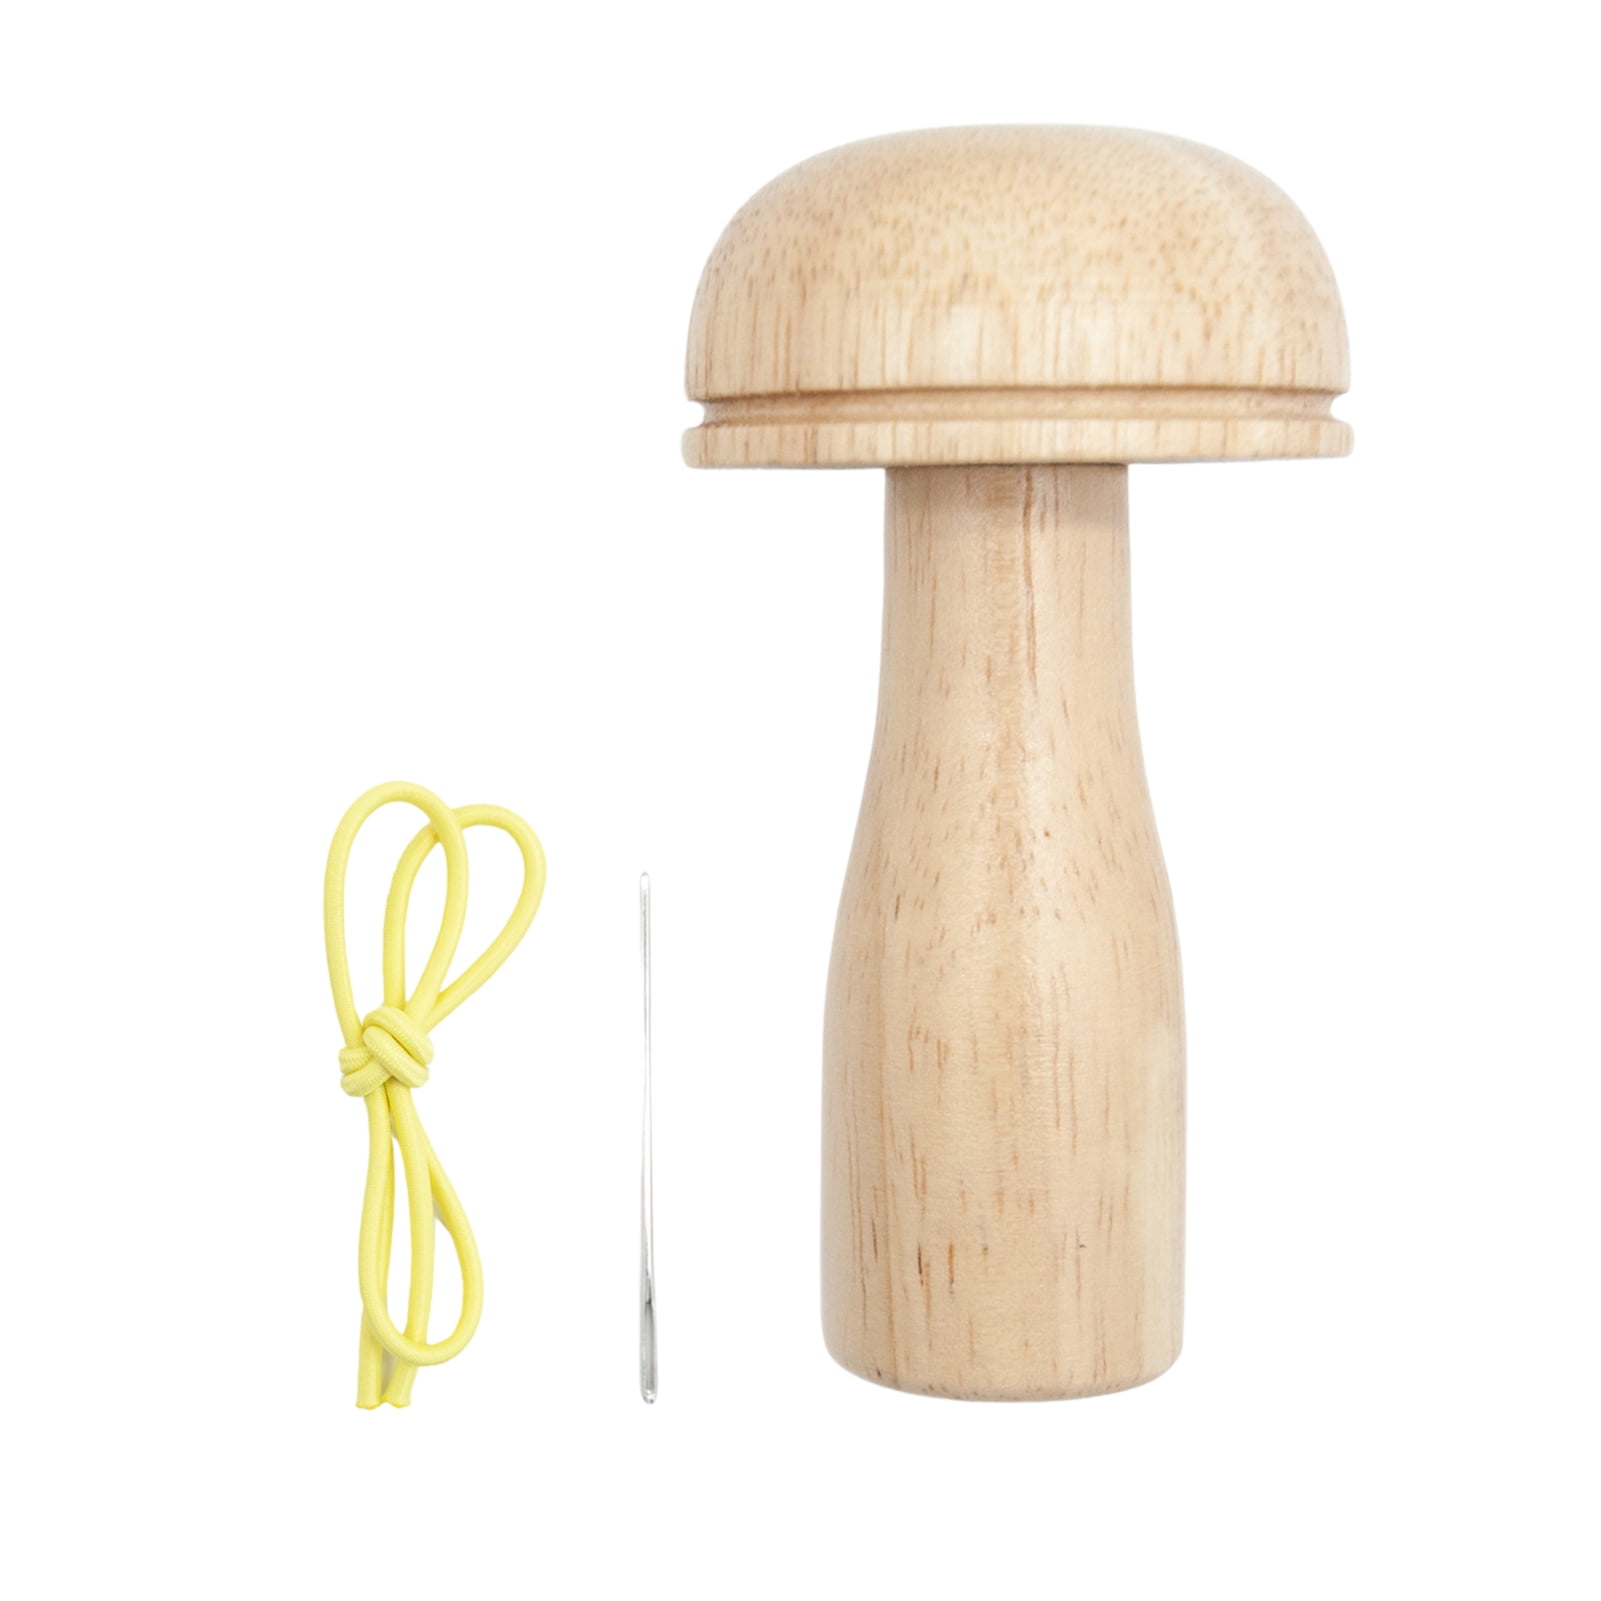 Firxreer Darning Mushroom | Sewing Kit | Wooden Darning Tool Compact Lightweight Sewing Kits with Ten Different Color Threads for Darning Socks, Sweaters, Pants, Hats, - Walmart.com